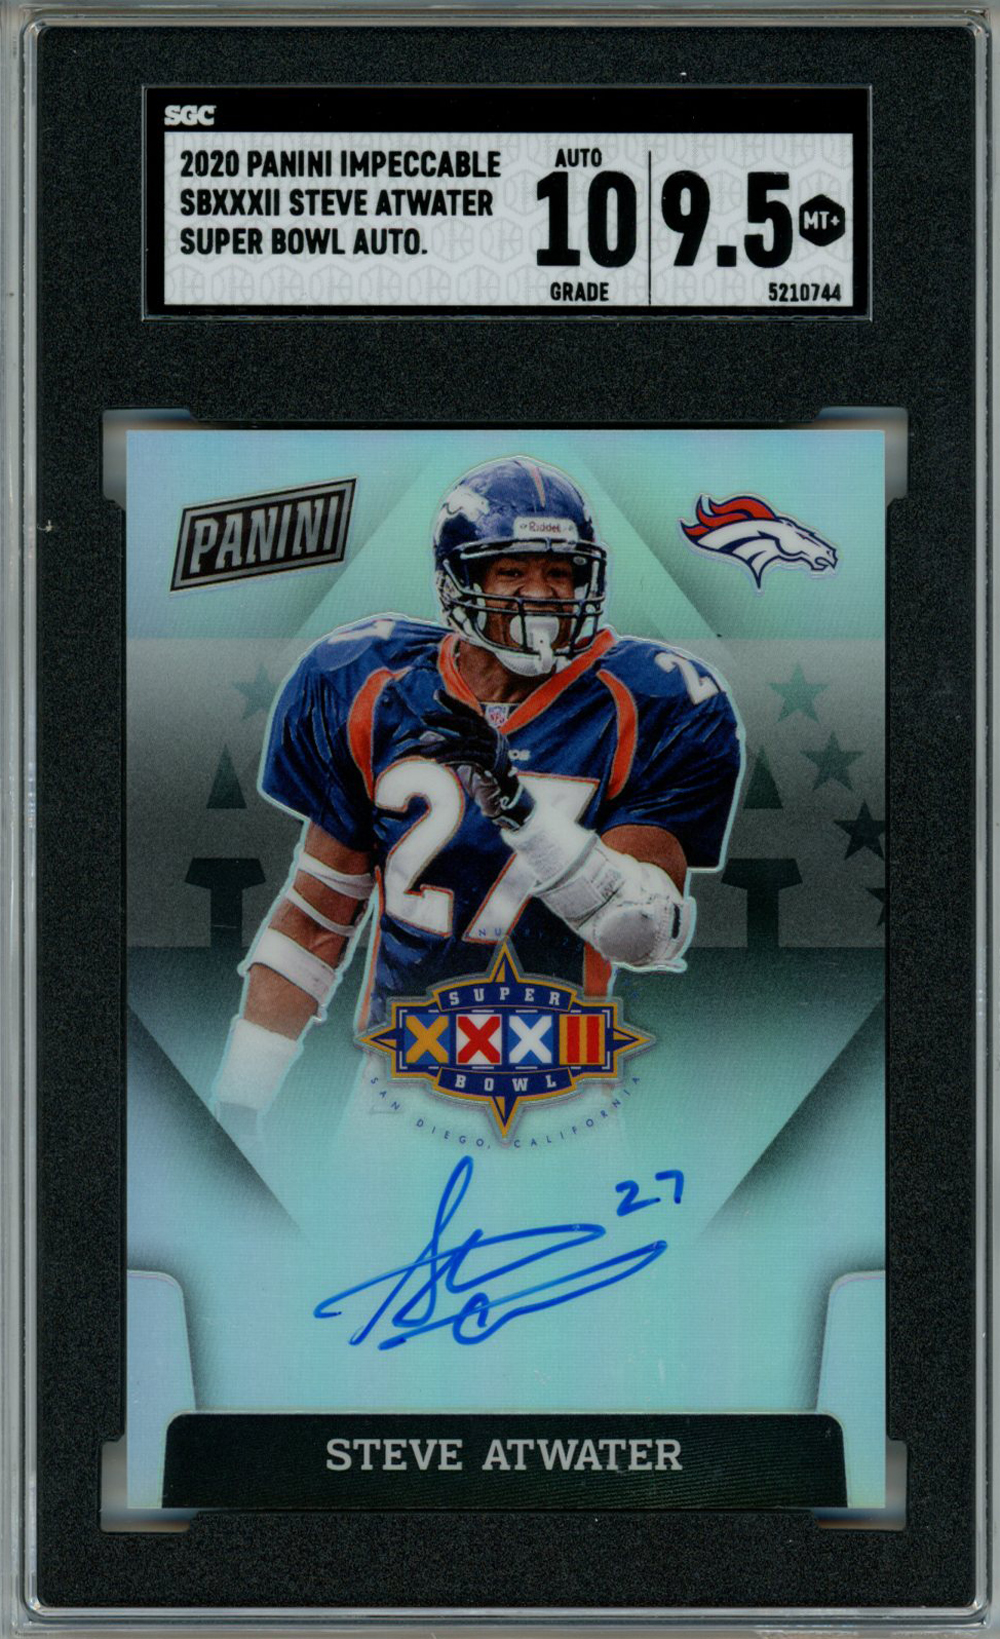 Steve Atwater Autographed 2020 Panini Impeccable SBXXXII Trading Card